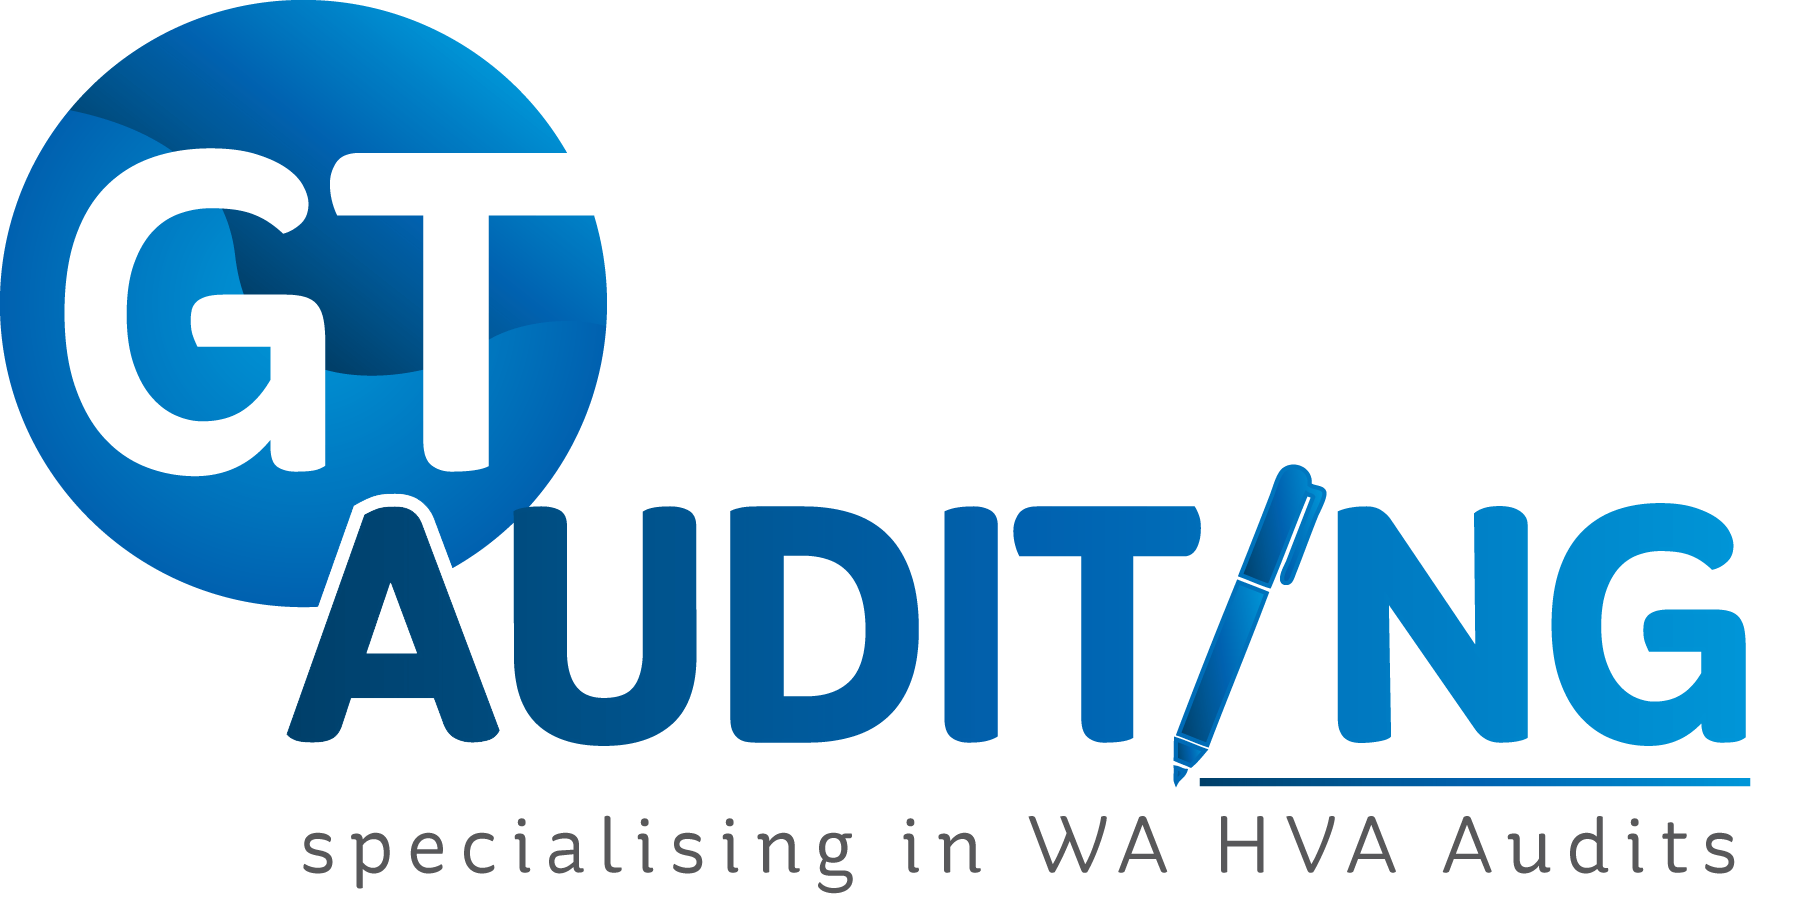 Auditing Logo - GT Auditing. At GT Auditing Services we pride ourselves